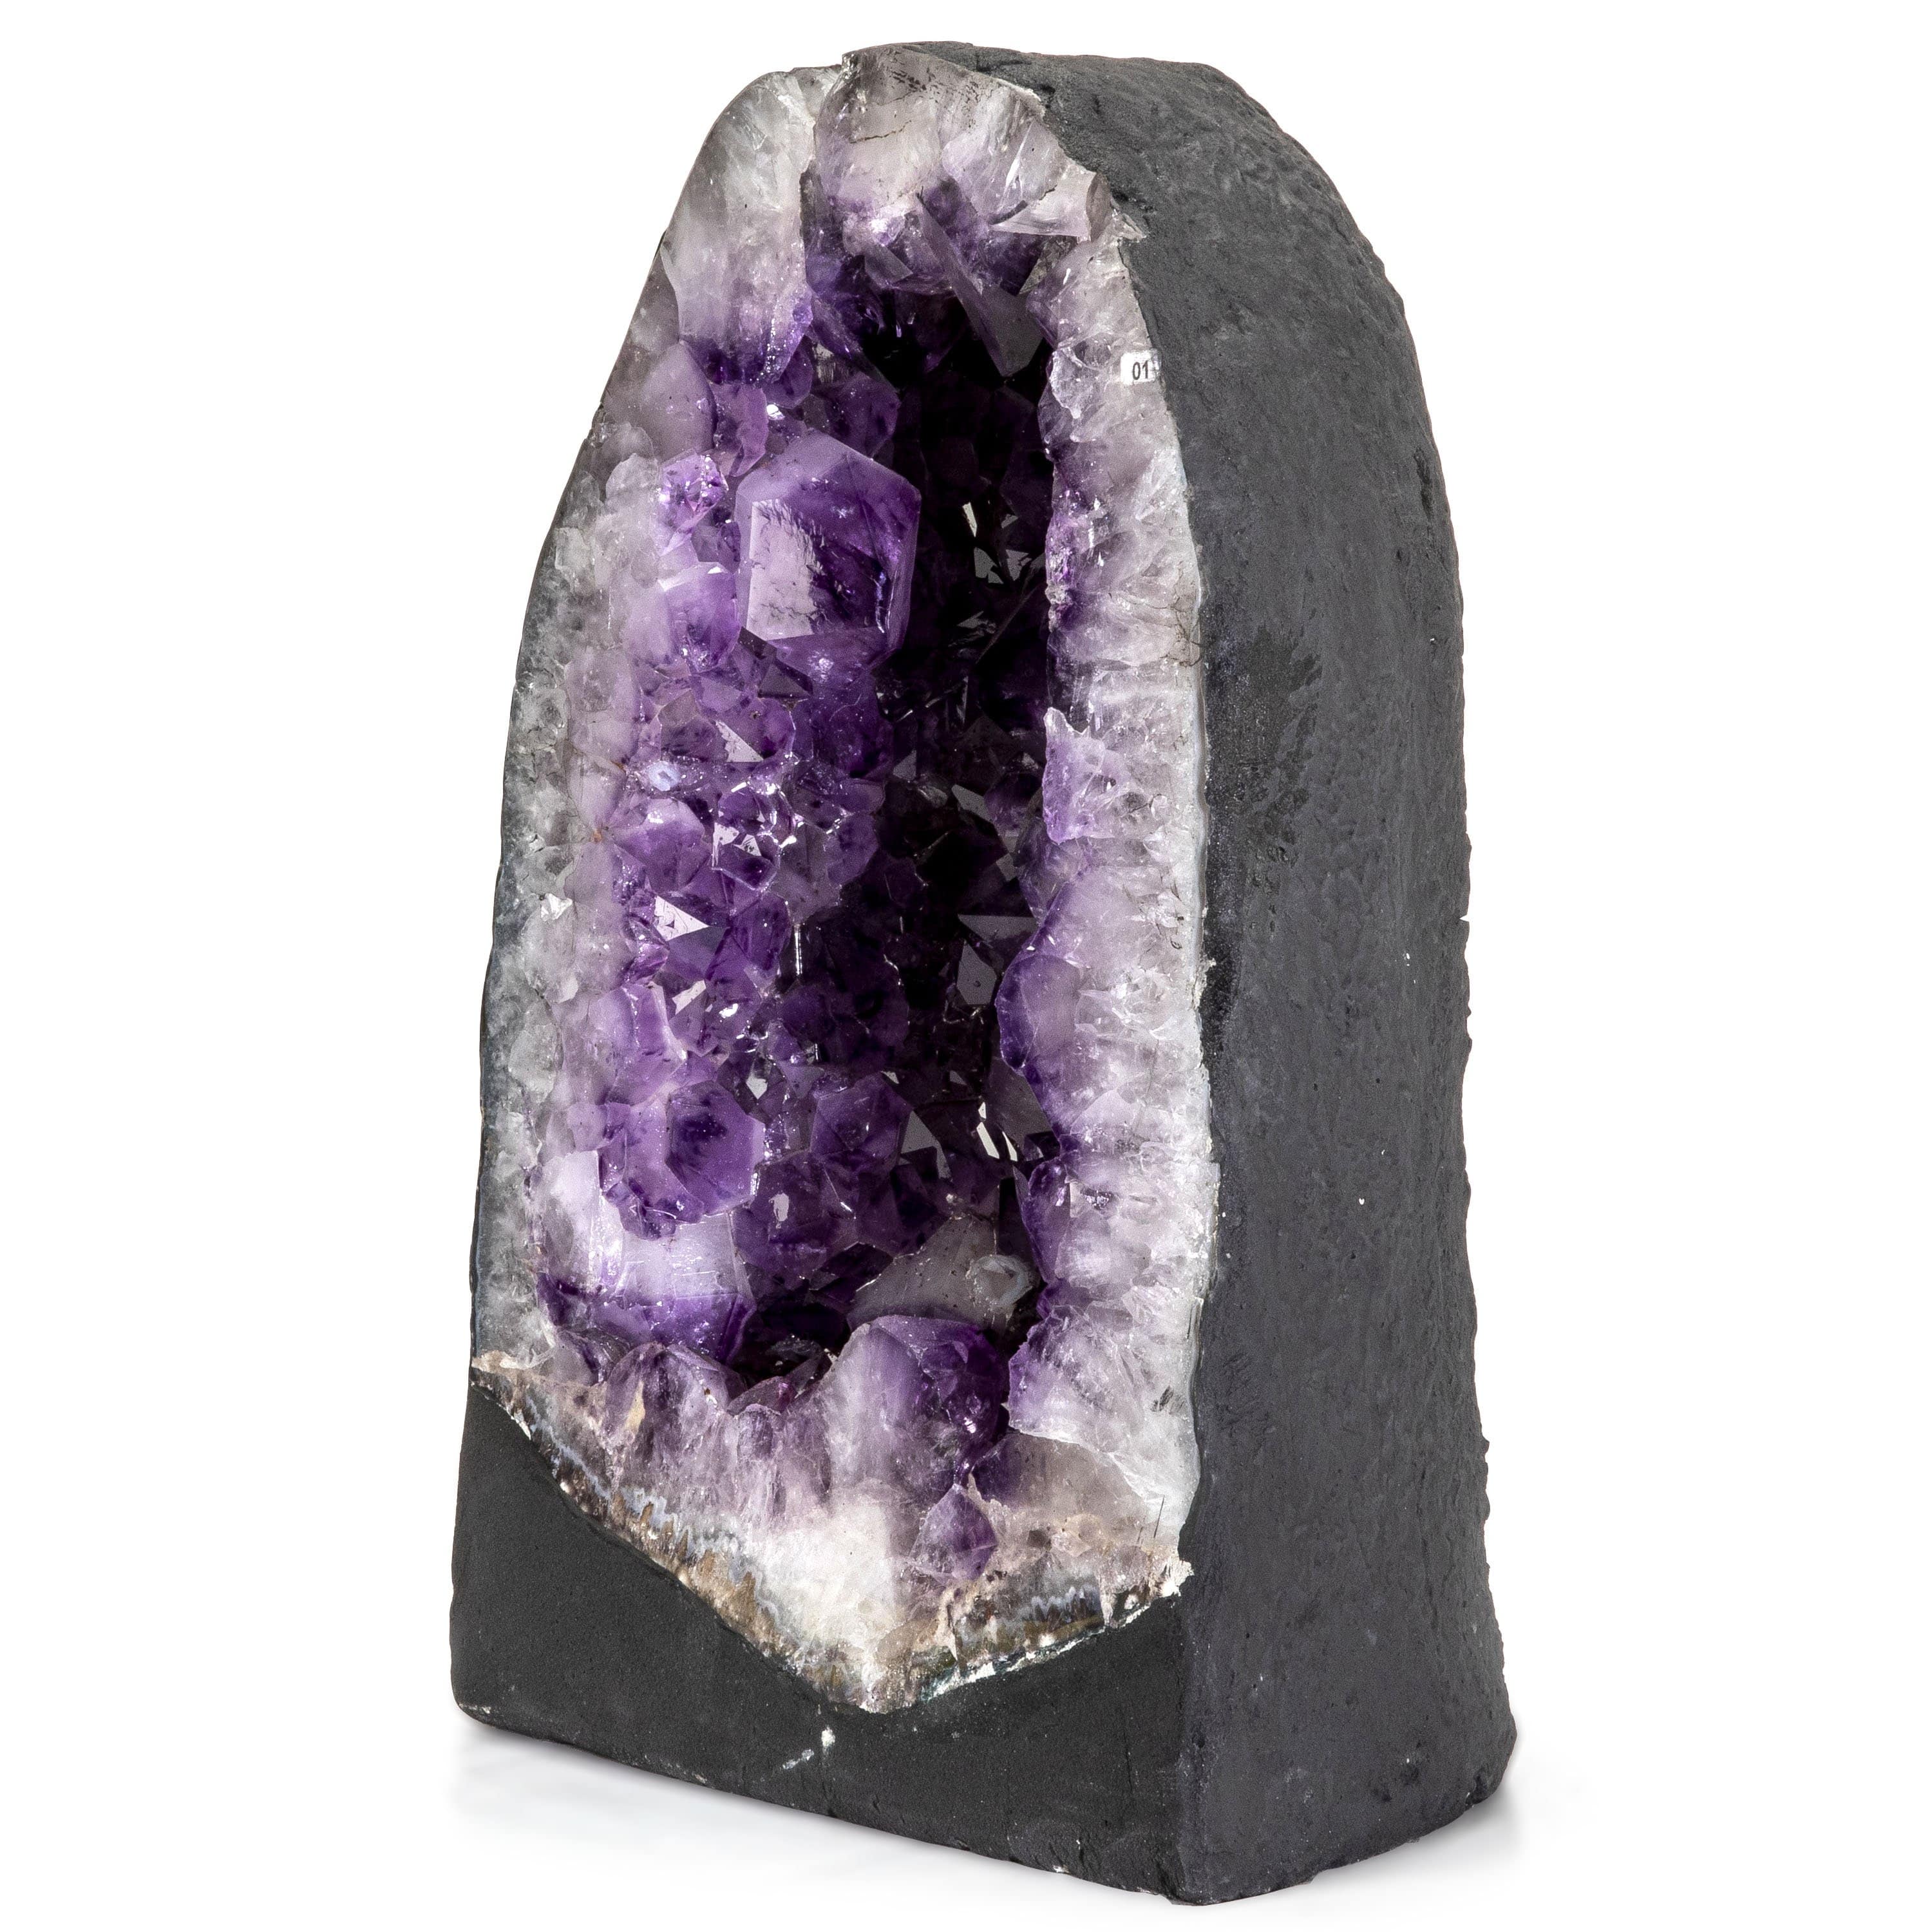 Kalifano Amethyst Natural Brazilian Amethyst Crystal Geode Cathedral - 16.5 in / 58 lbs BAG7200.002